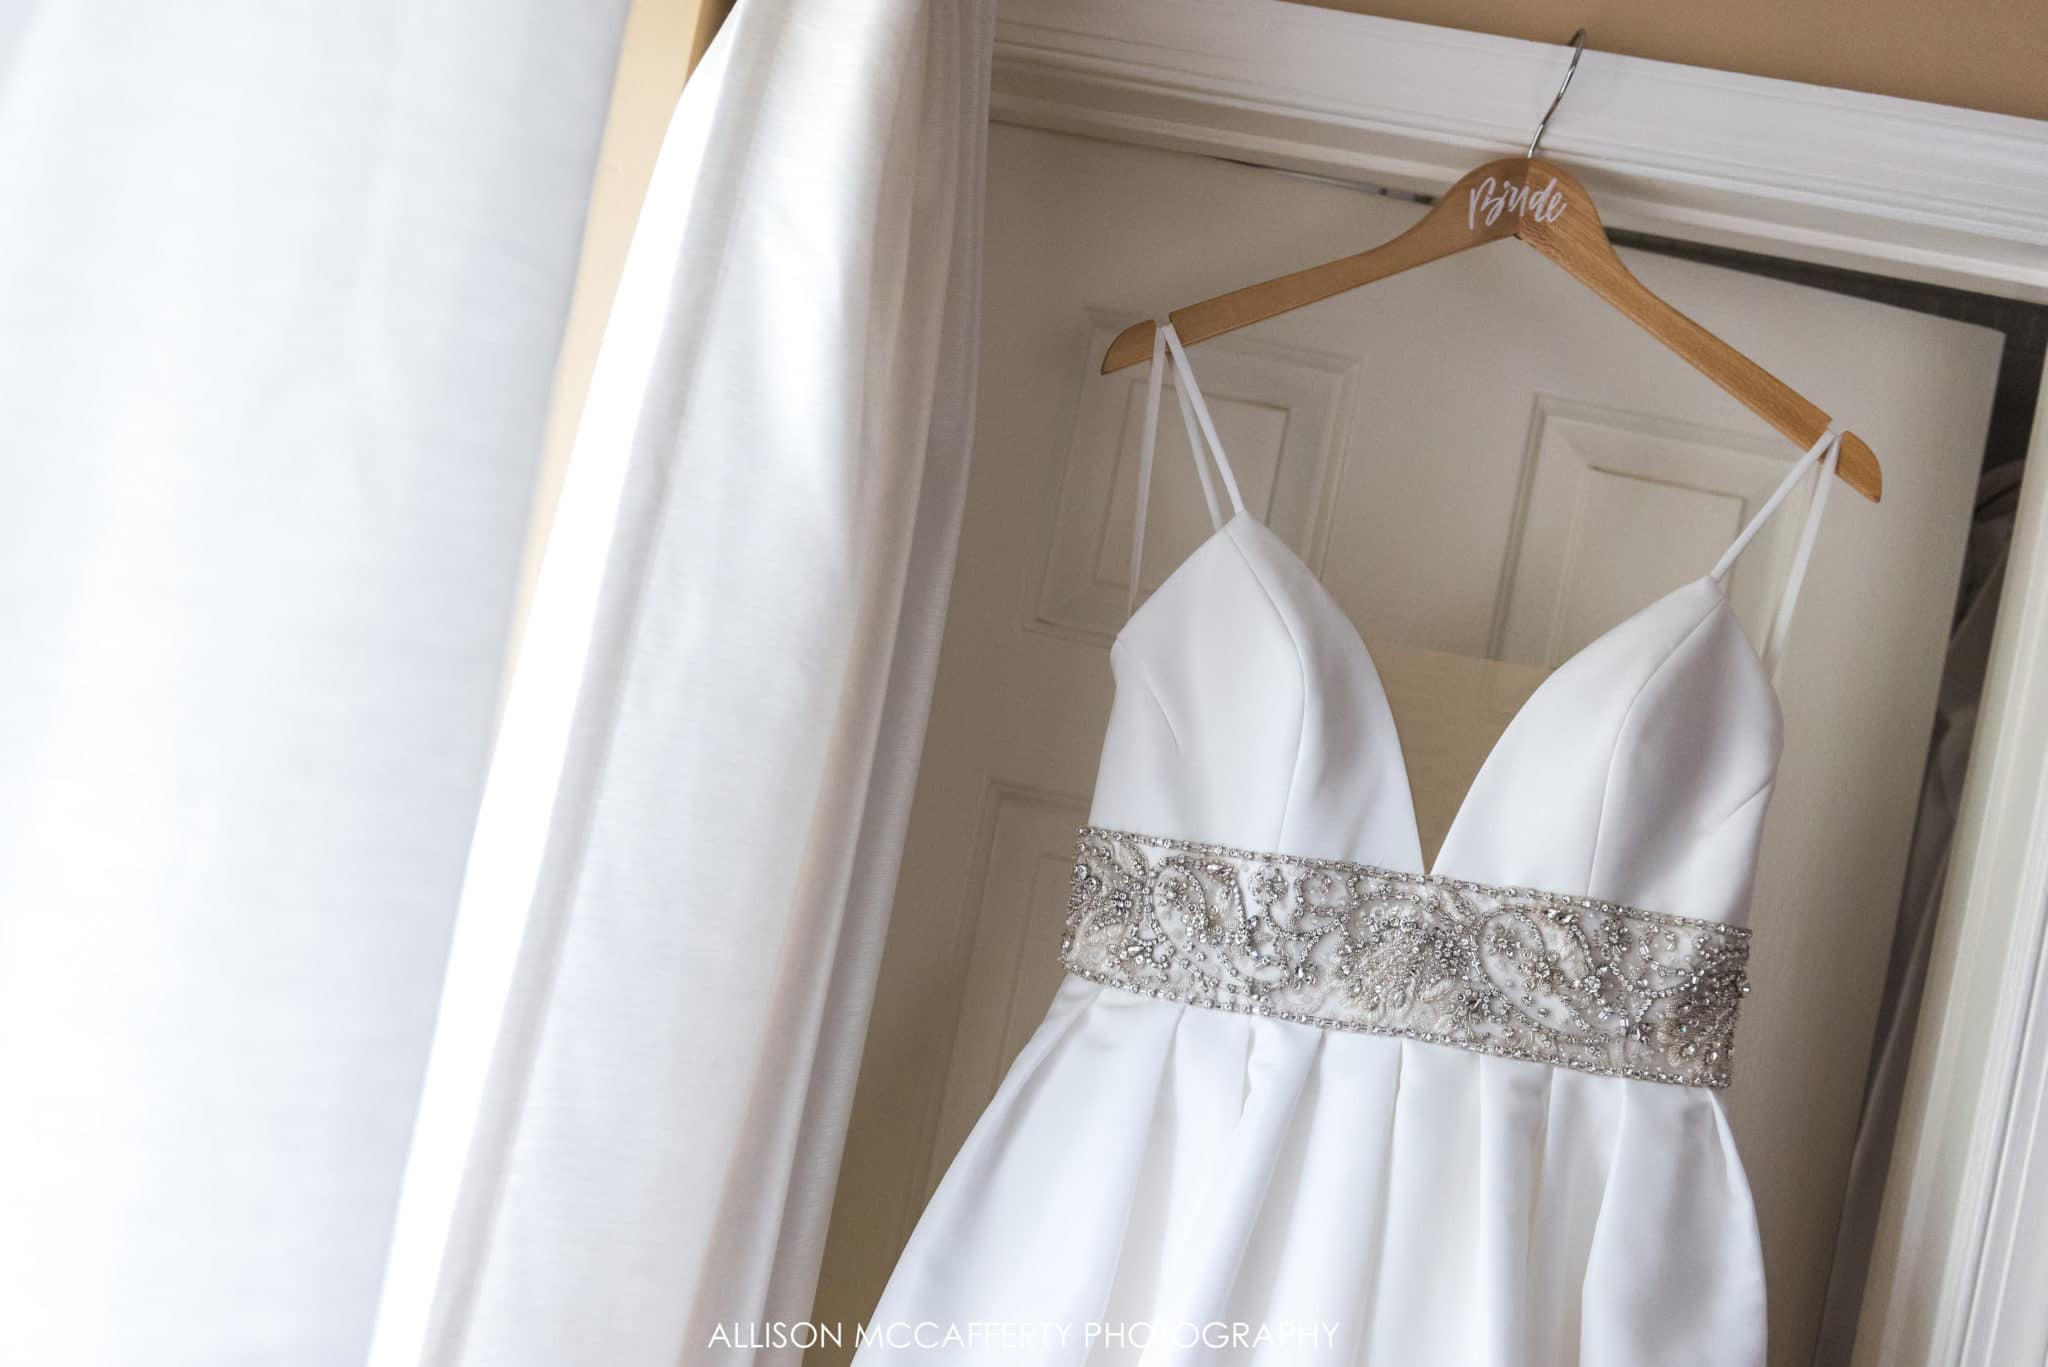 Wedding gown hanging by the window